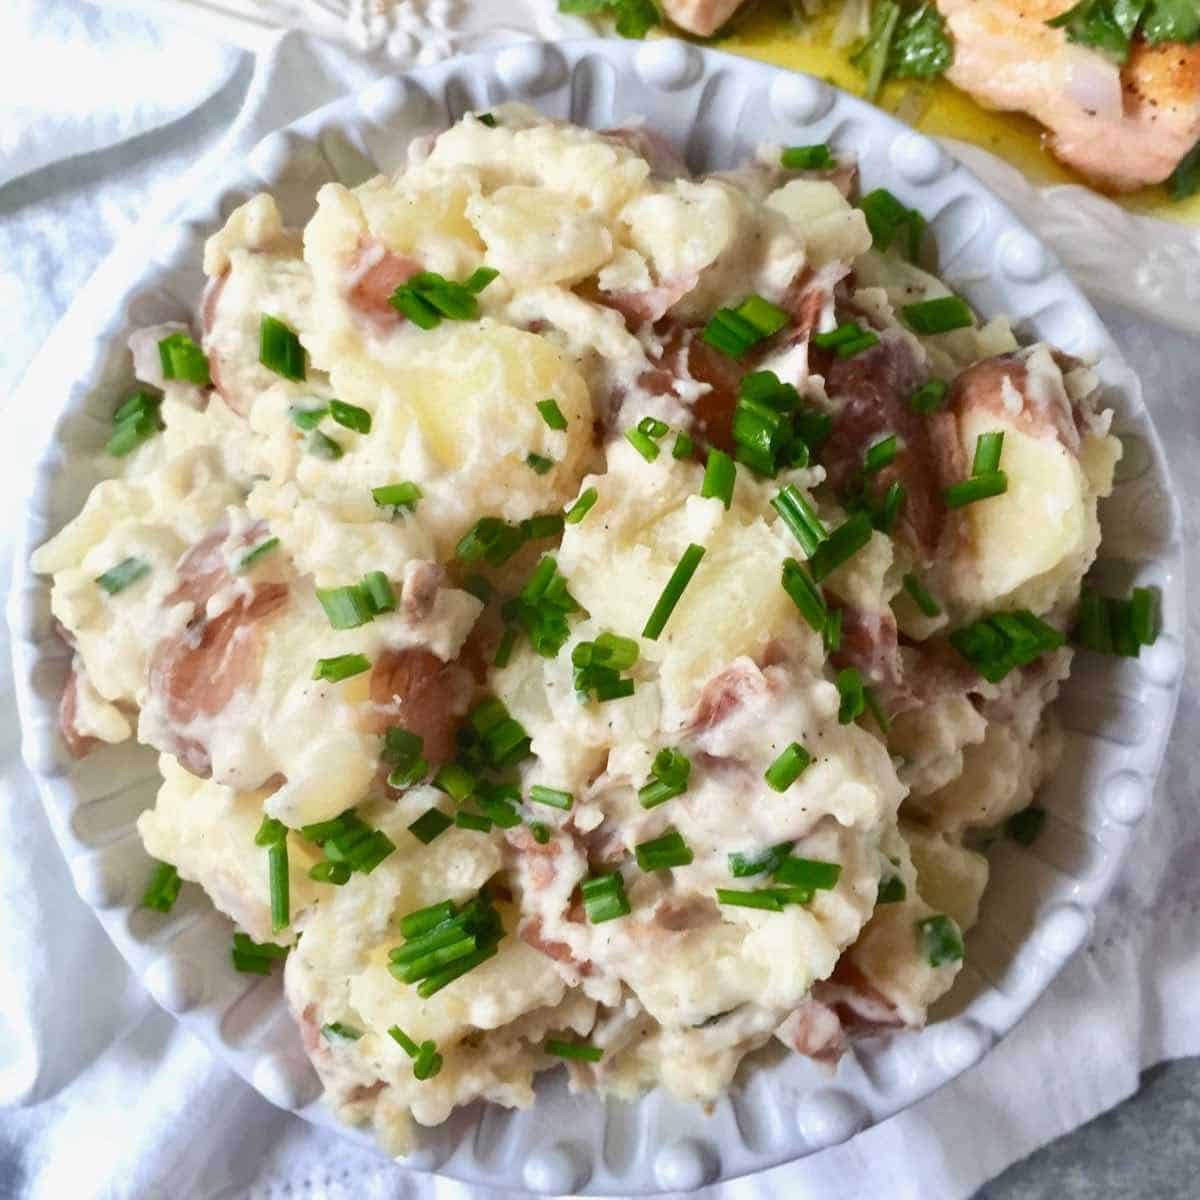 Mashed Potatoes for Two Inspirational Rustic Mashed Potatoes for Two Recipe